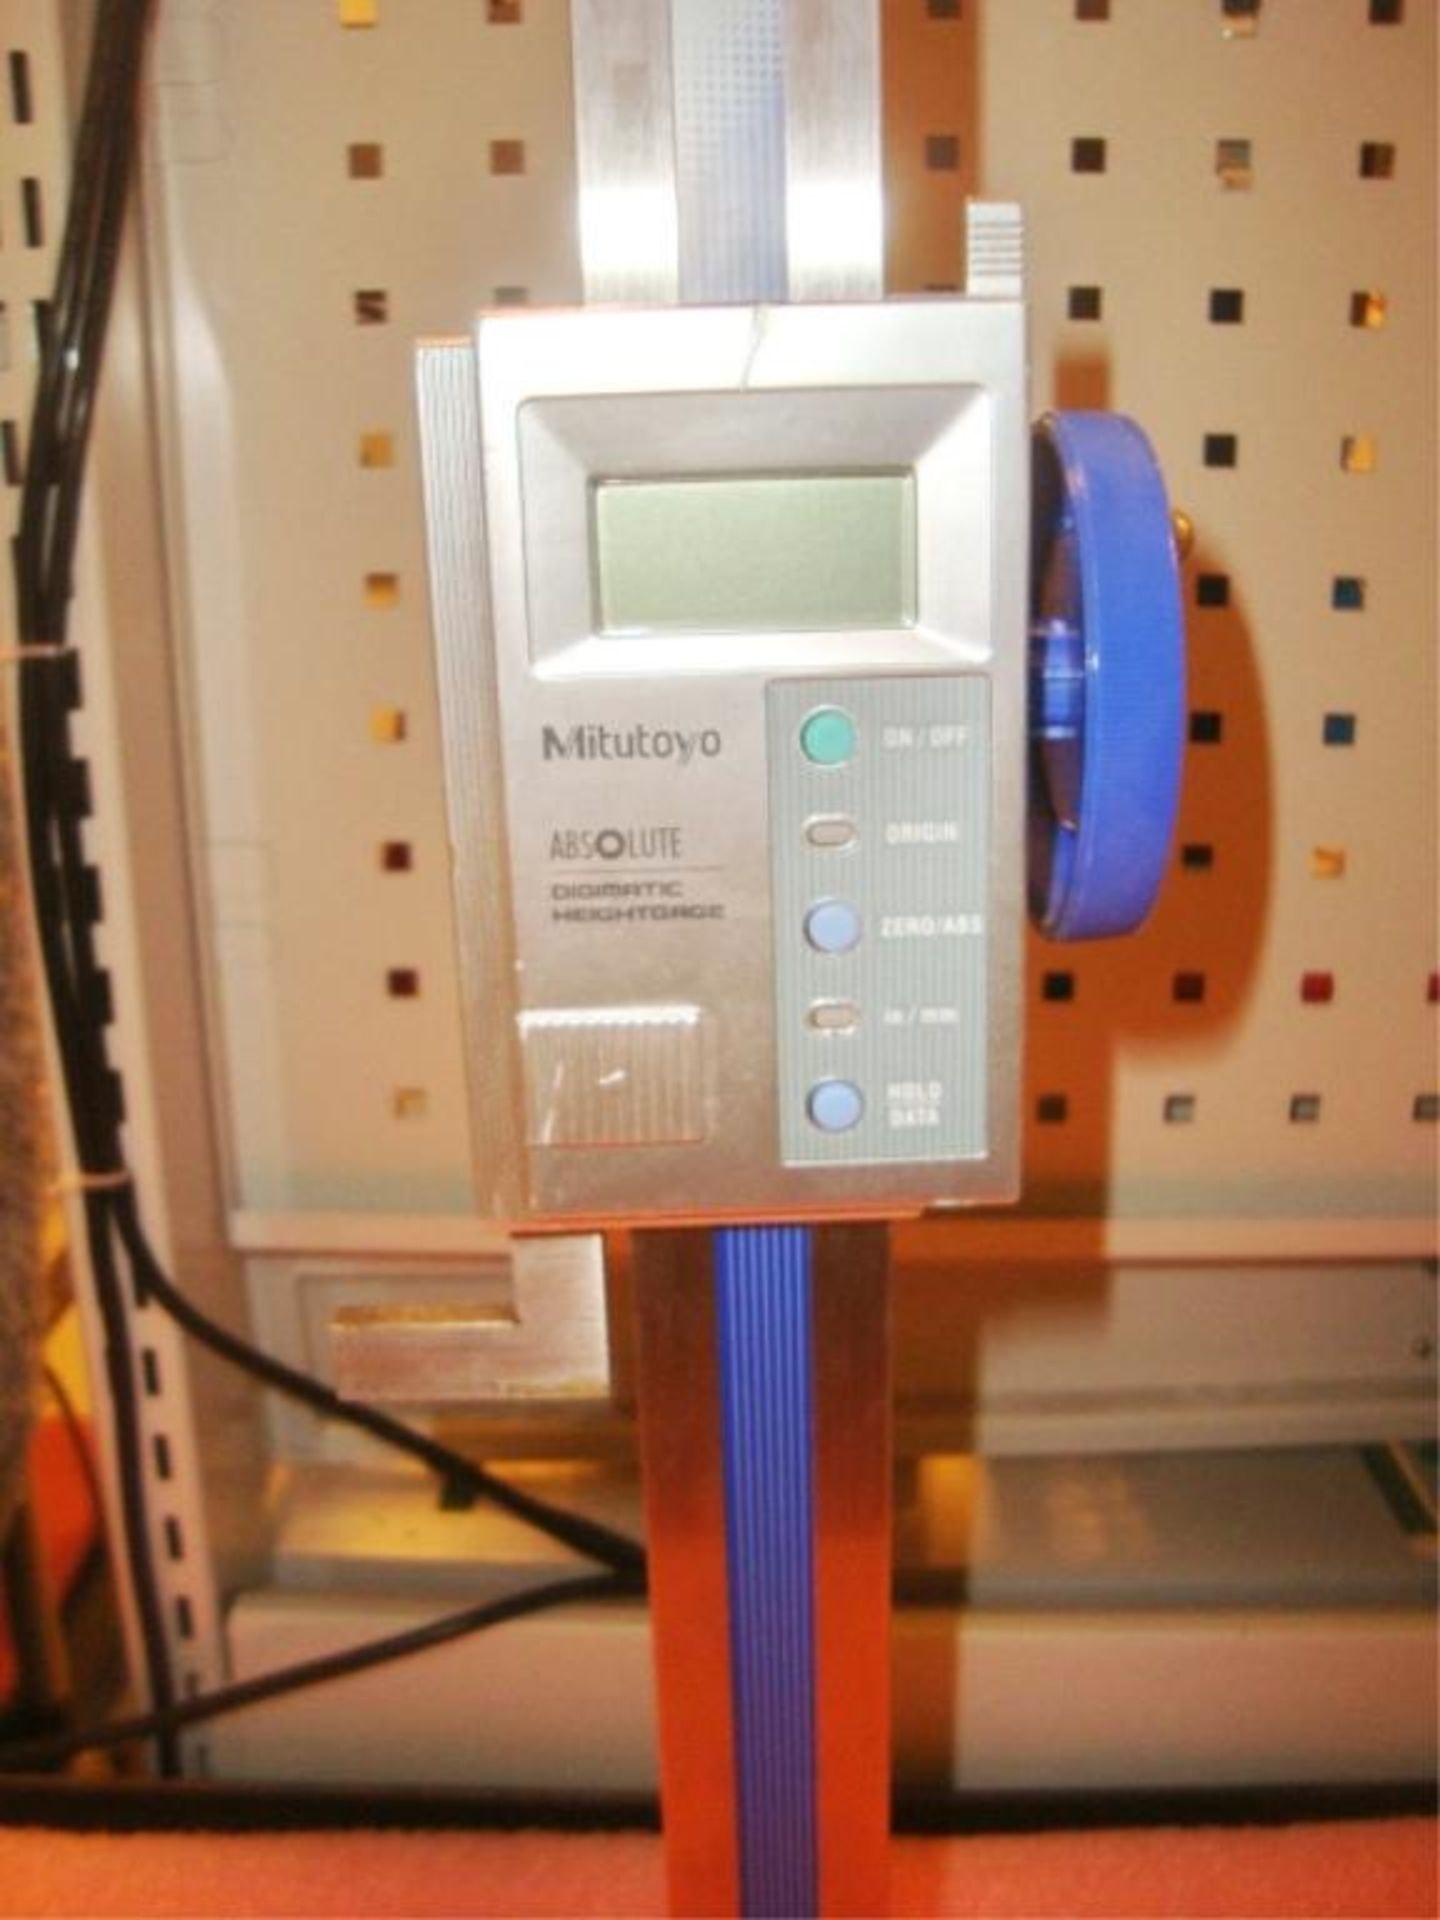 Absolute Digimatic 12" in. Height Gage - Image 4 of 4